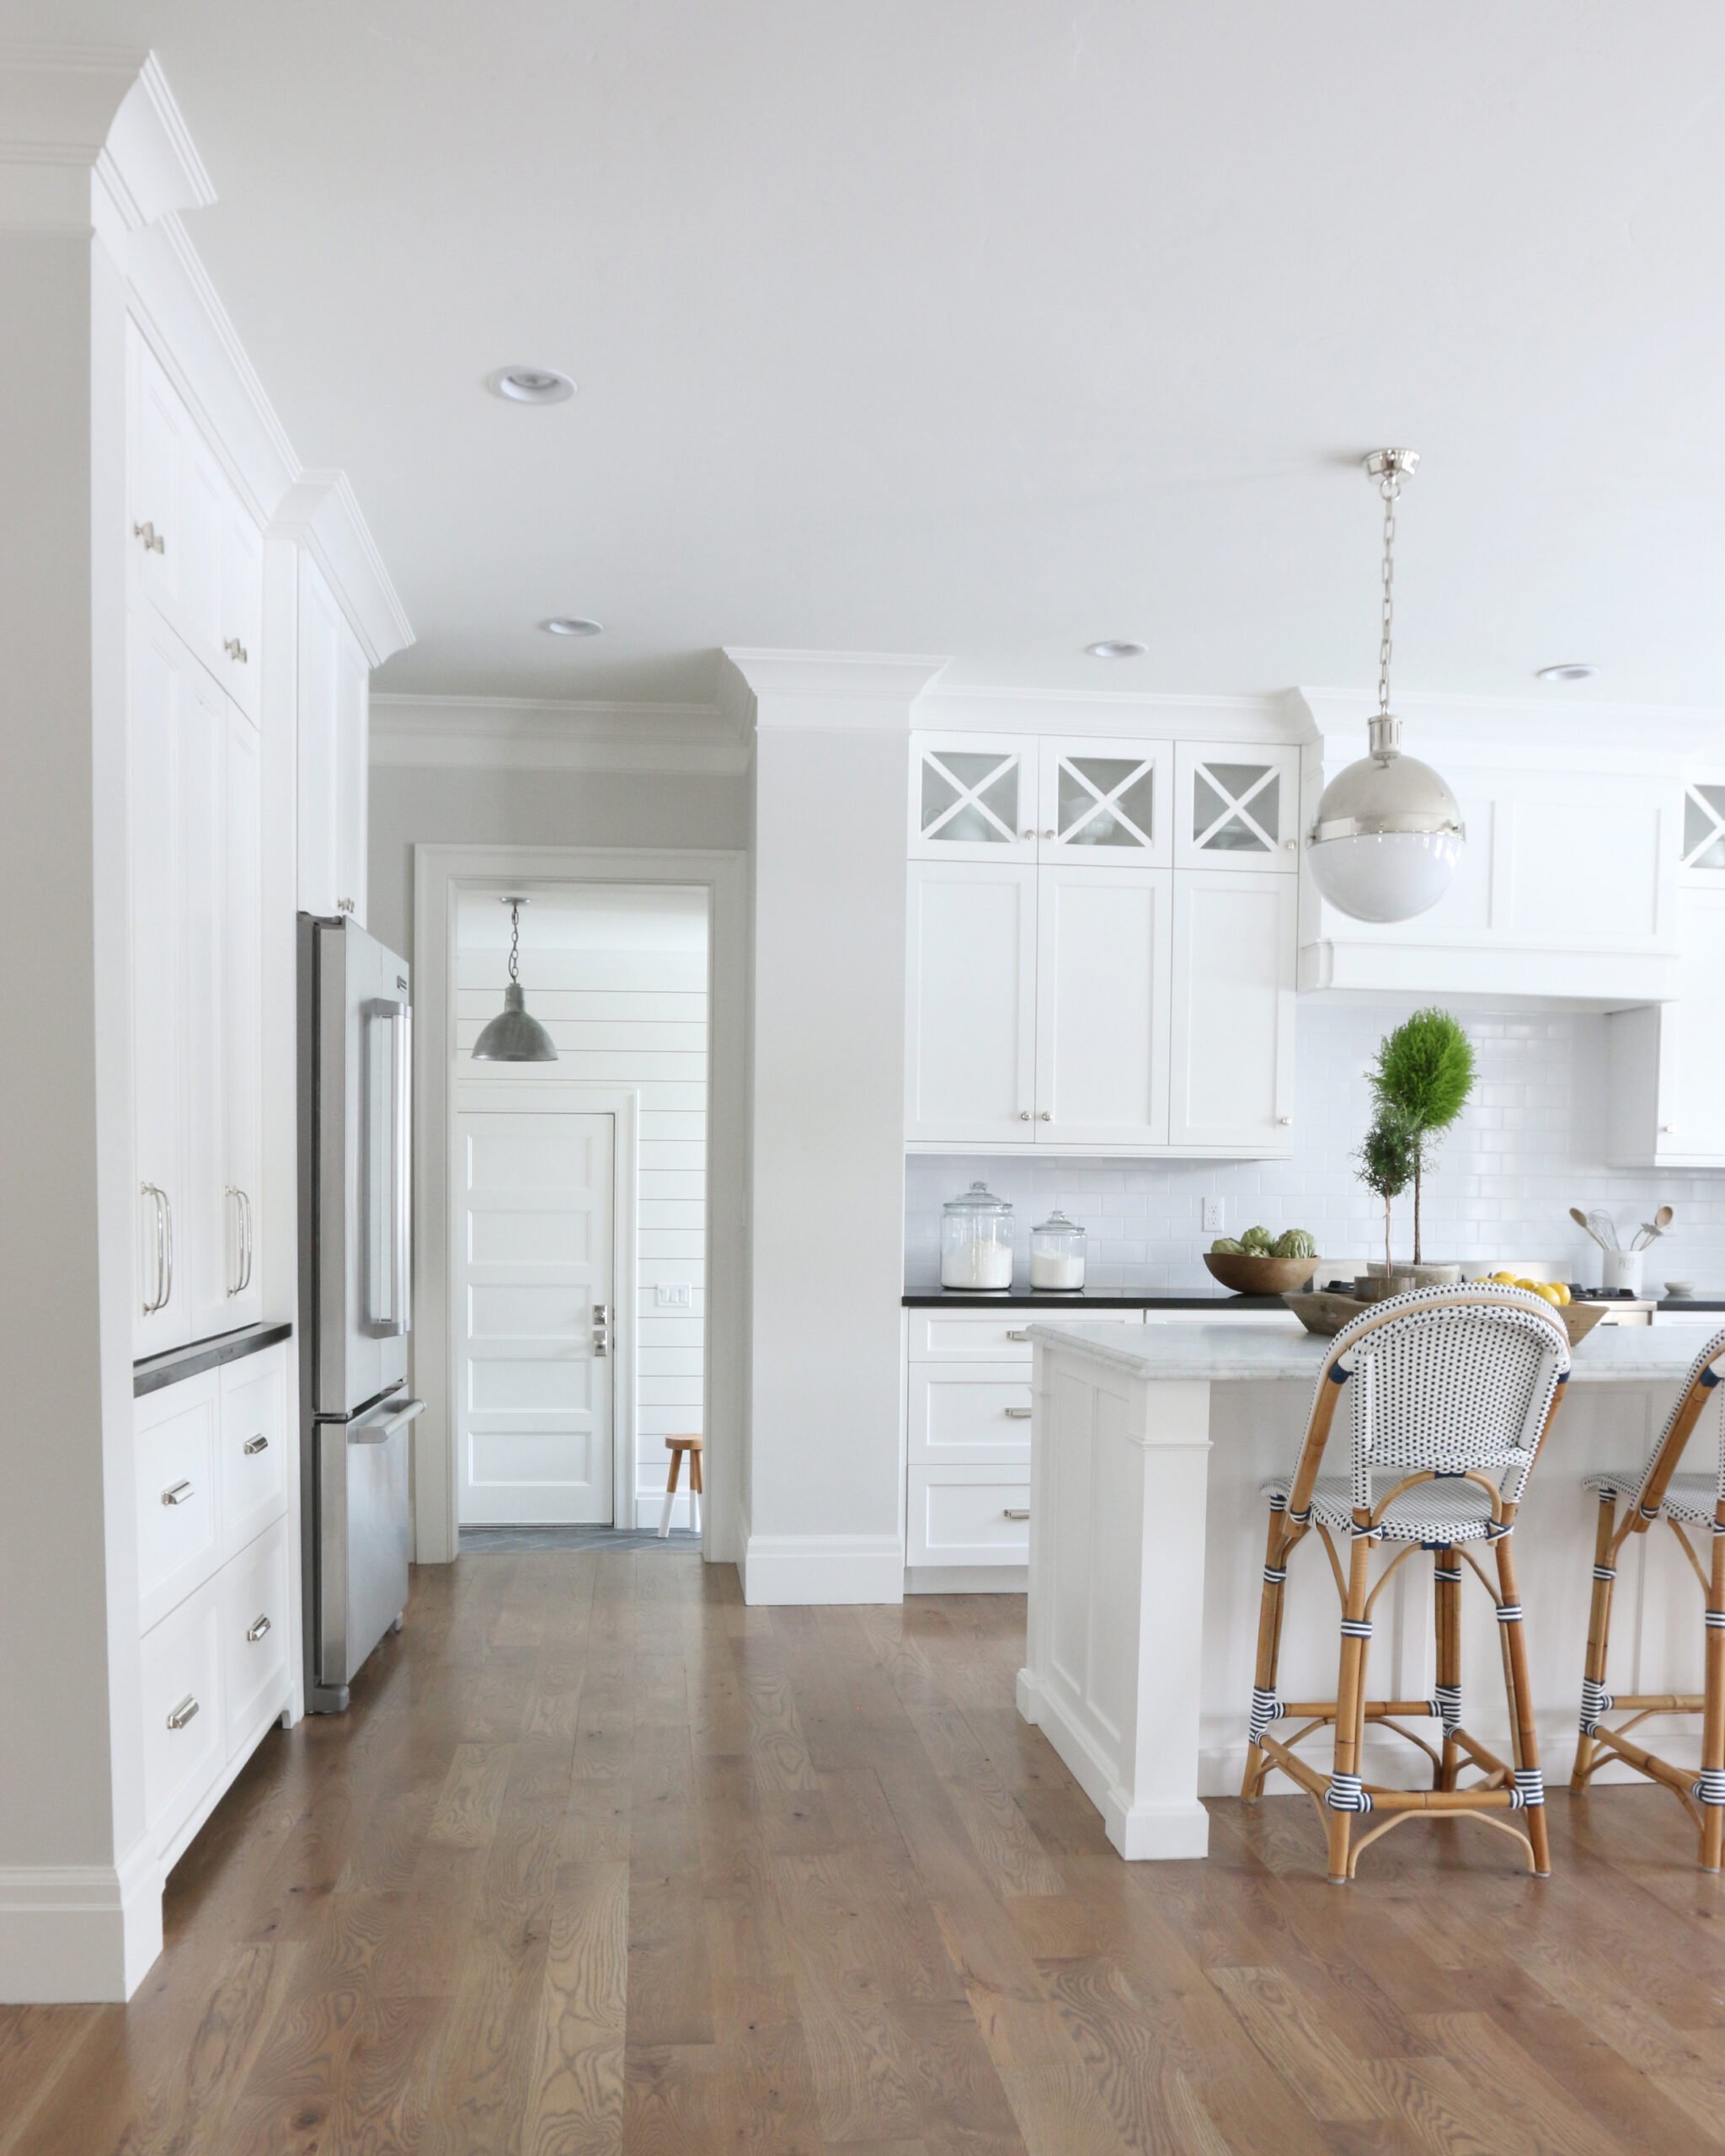 White kitchen with black countertops and french bistro counter stools. Walls are painted Classic Gray.